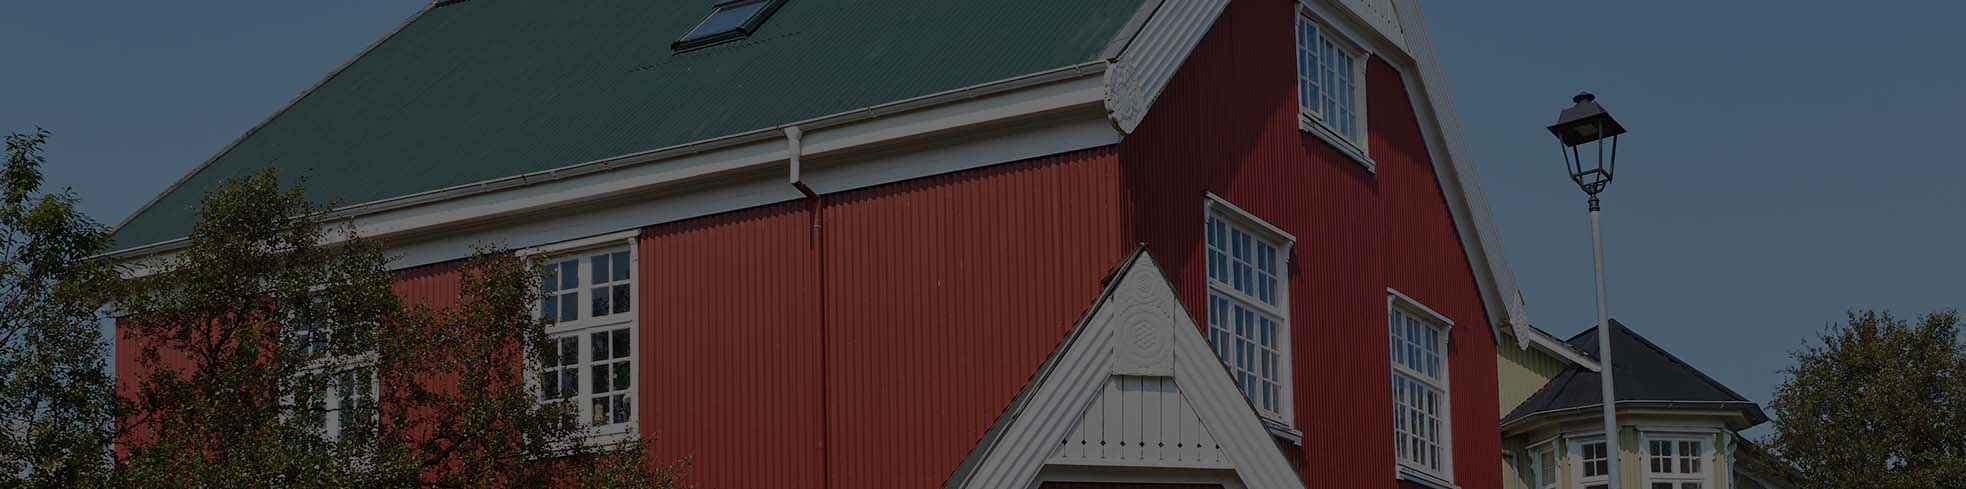 EDCO steel siding for Milwaukee area homes is attractive and durable for long-lasting results